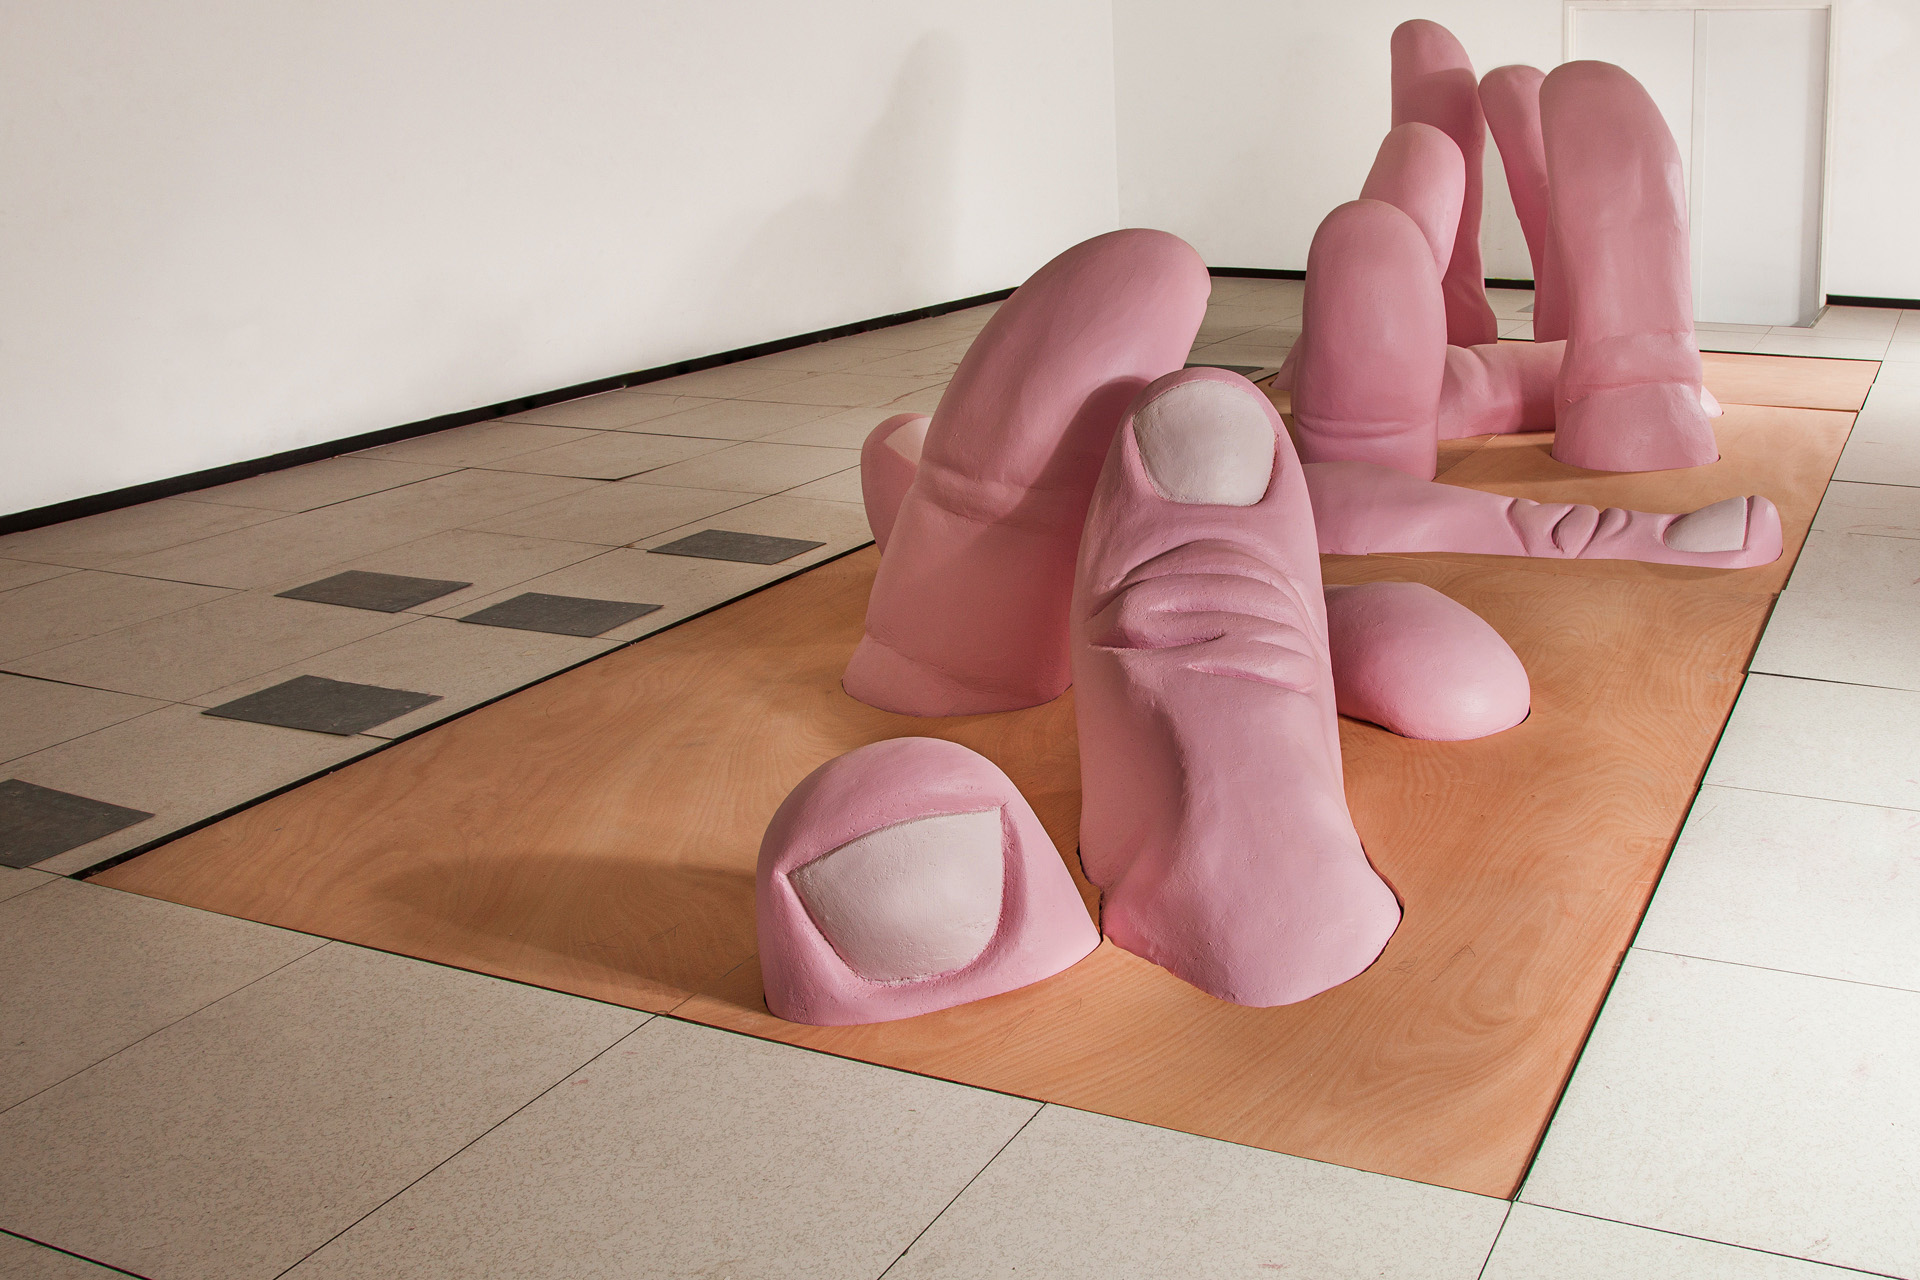 11 large scale pink thumbs sunk into the floor in a composition influenced by Raft of the Medusa by Theodore Jericho